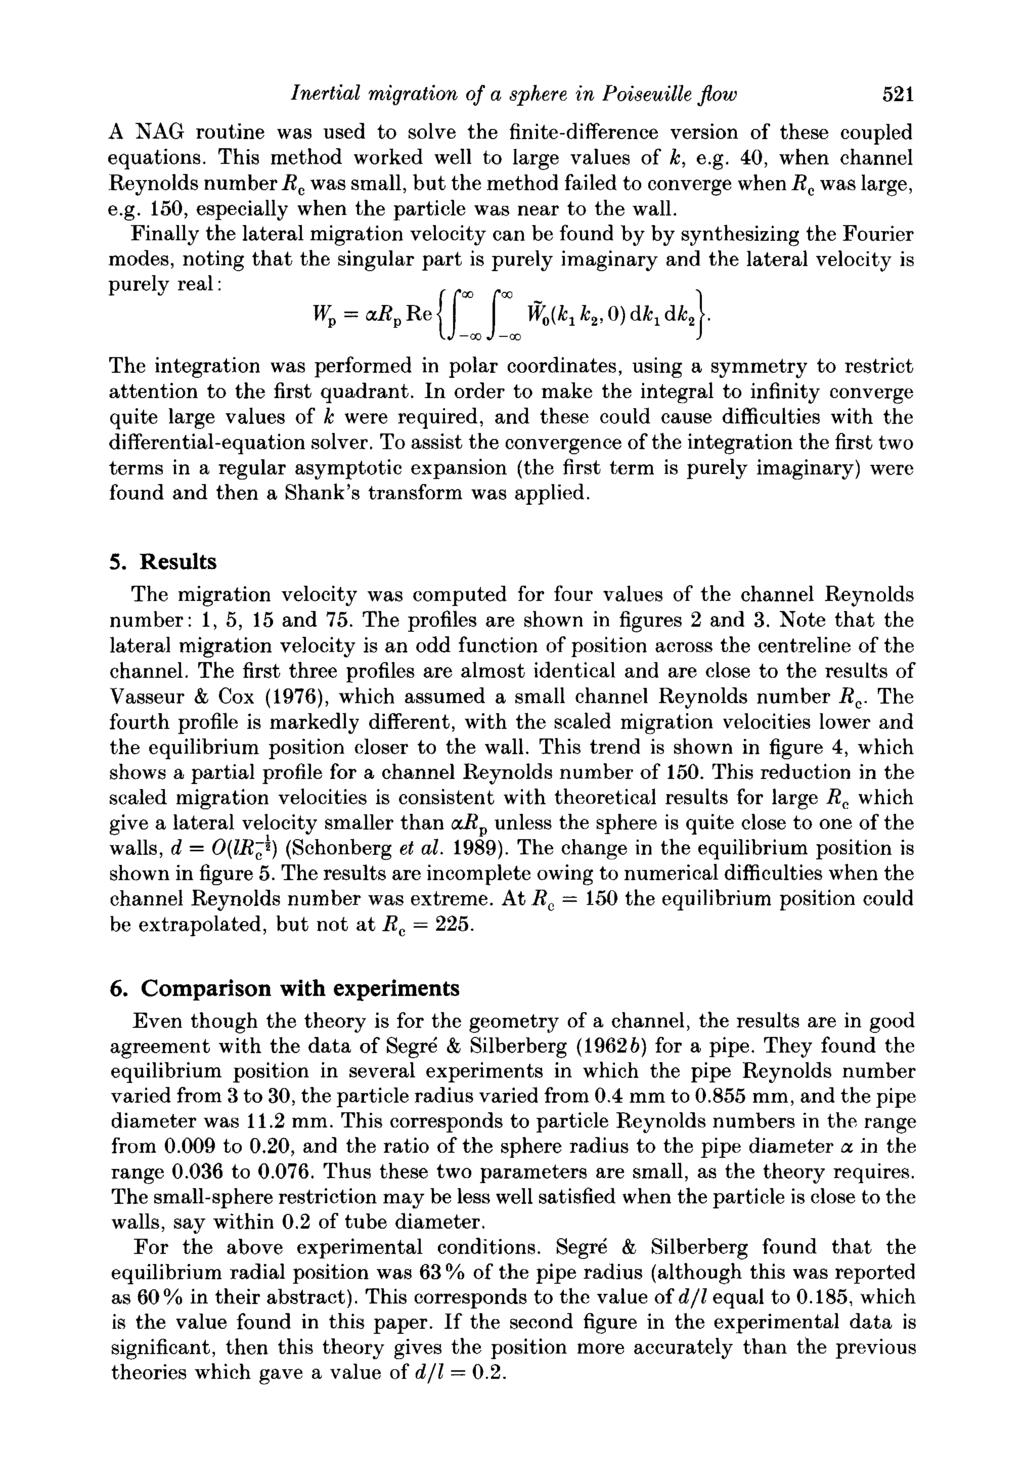 Inertial migration of a sphere in Yoiseuille flow 52 1 A NAG routine was used to solve the finite-difference version of these coupled equations. This method worked well to large values of k, e.g. 40, when channel Reynolds number R, was small, but the method failed to converge when R, was large, e.